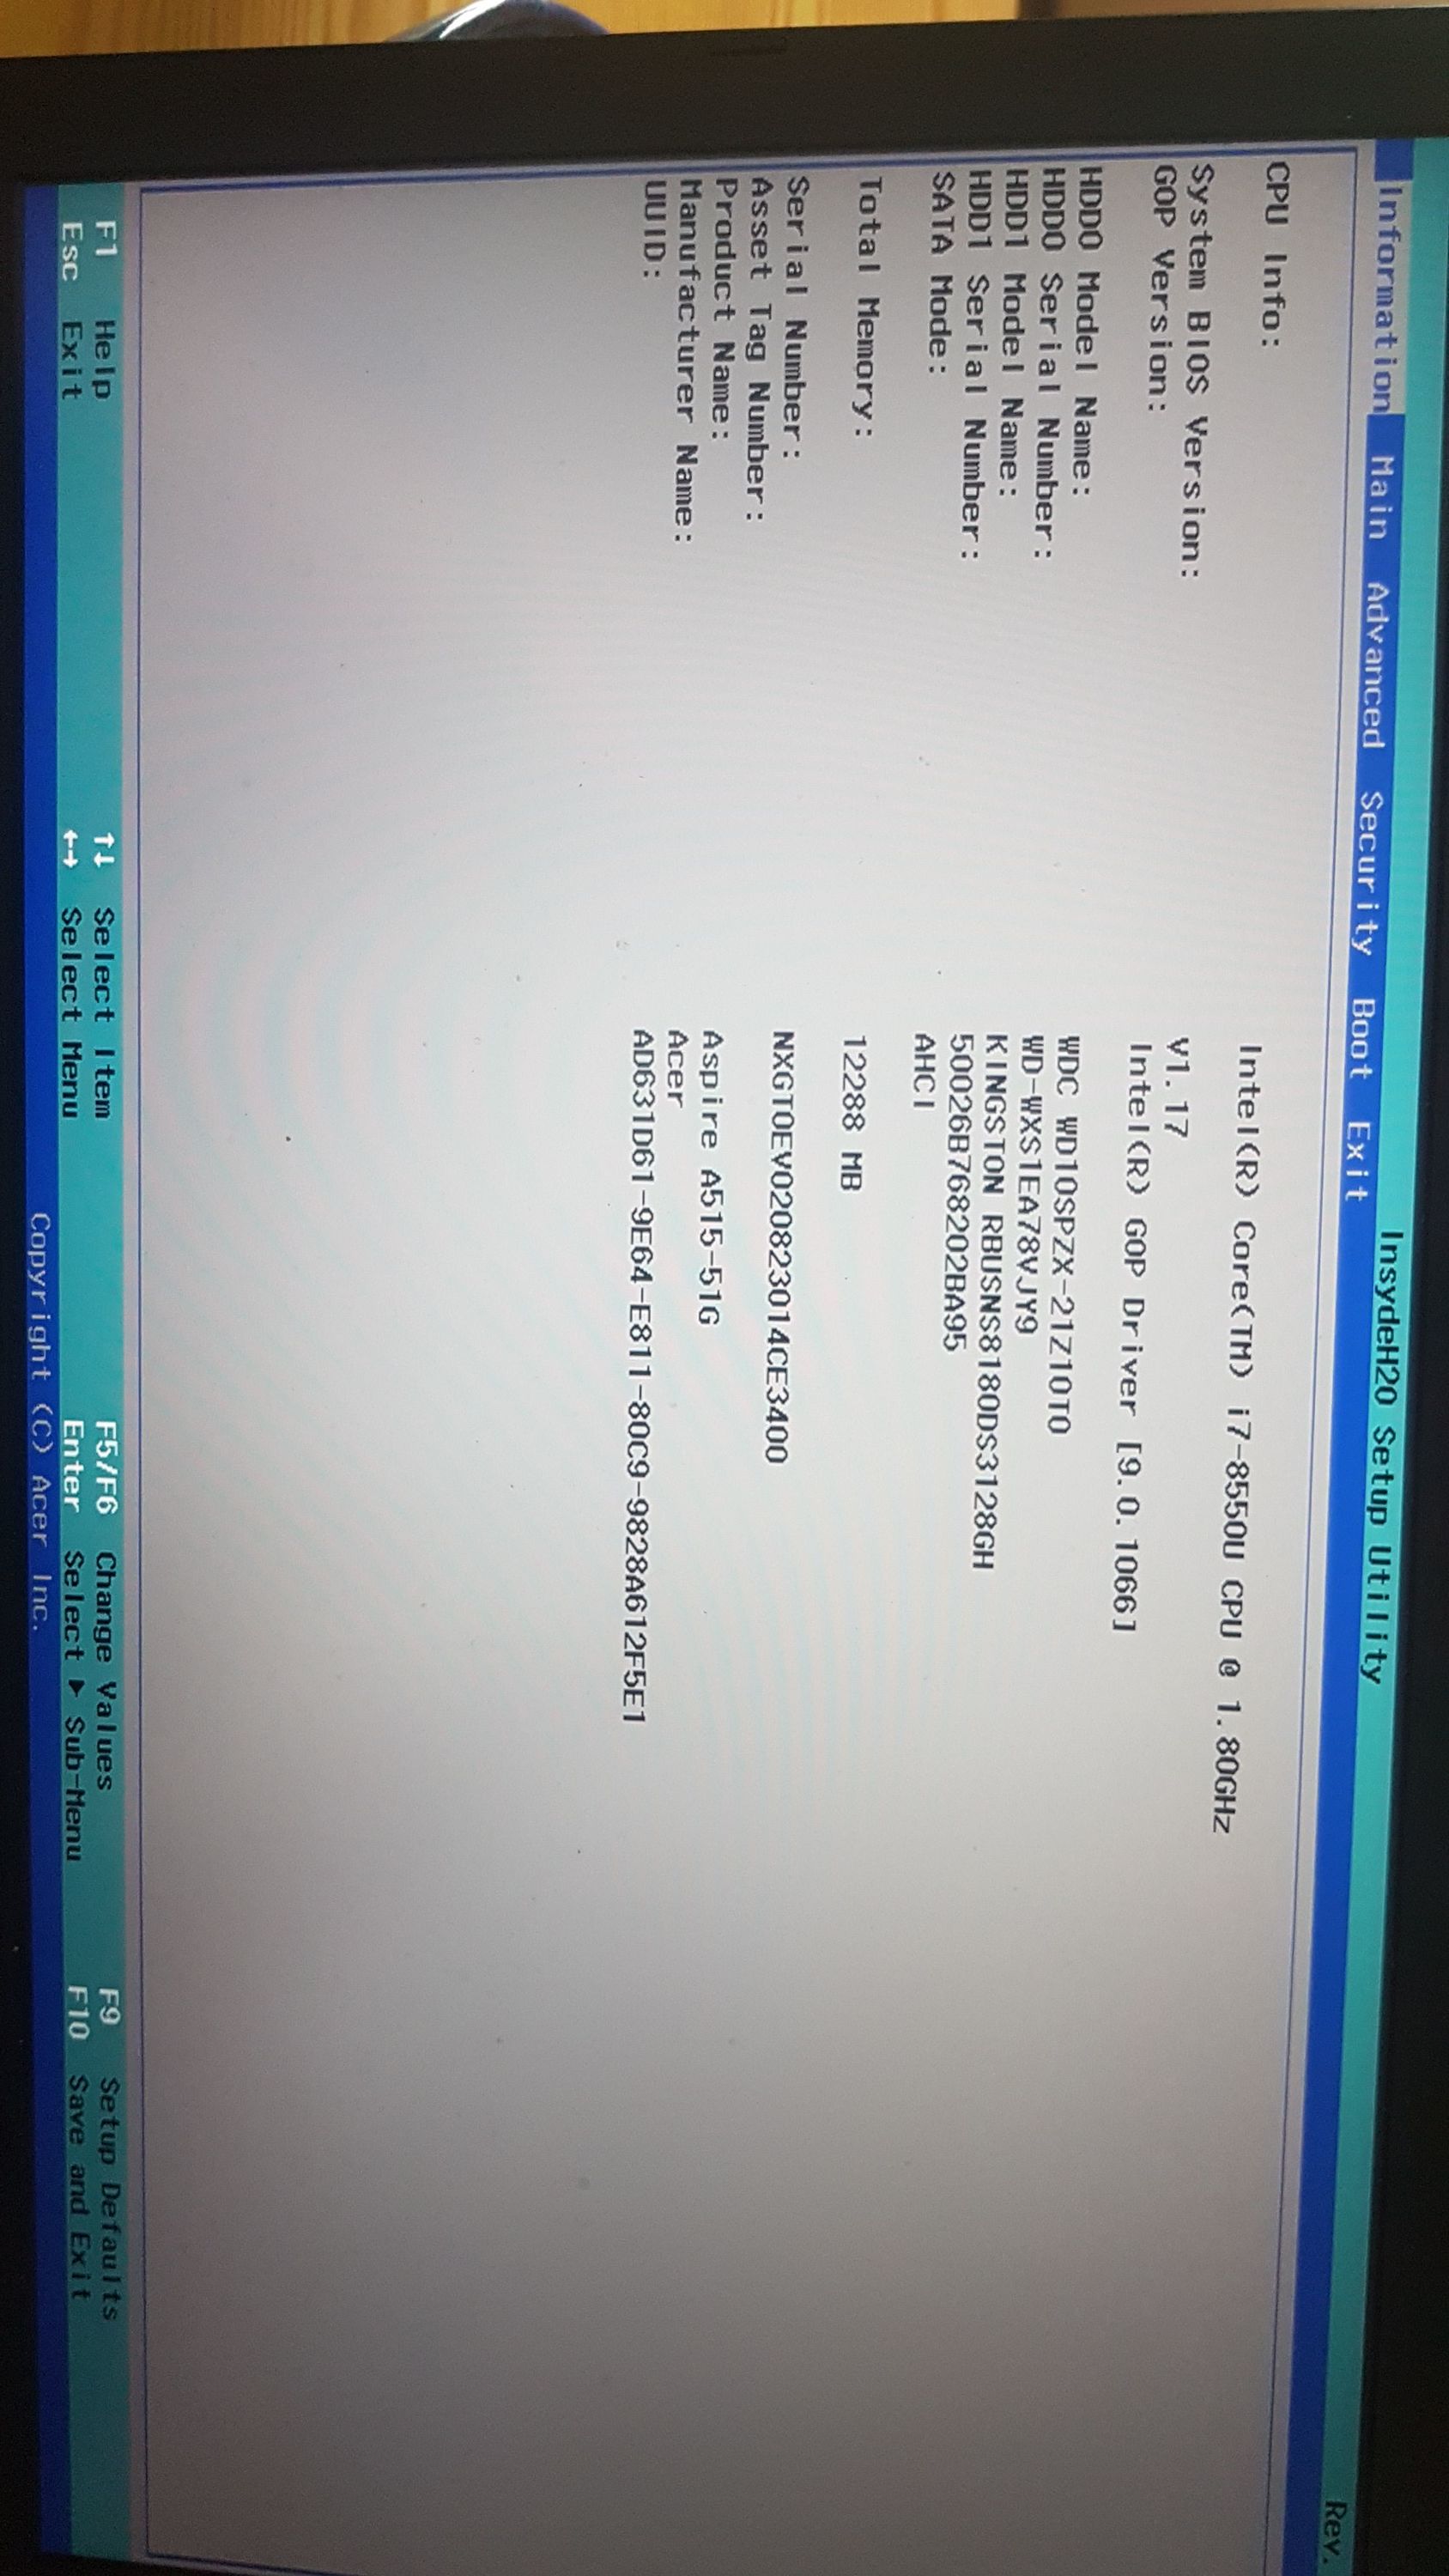 IRQL_NOT_LESS_OR_EQUAL / PAGE_FAULT_IN_NONPAGED_AREA Bluescreen nach RAM Update